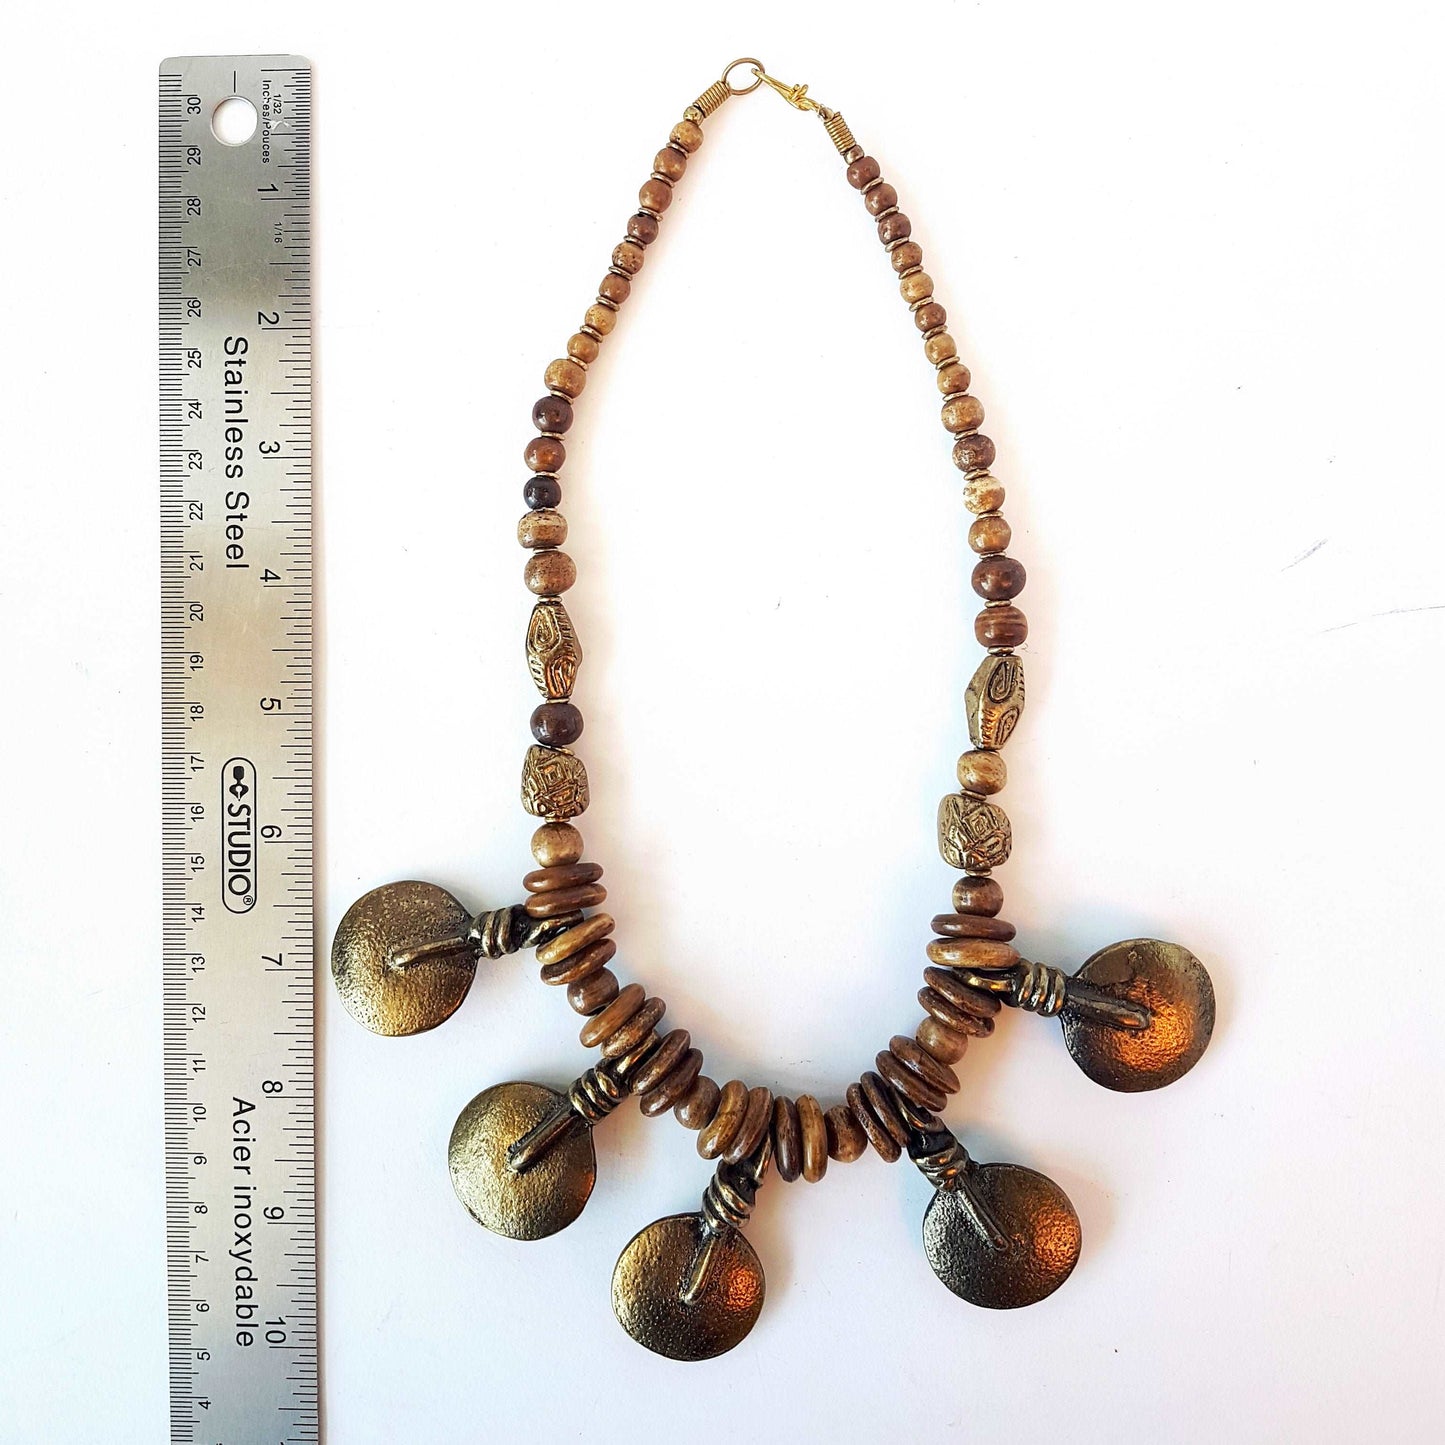 Bronze metal disc pendant necklace with rustic handmade beads.  Classic old world tribal design 19 inches long. Versatile casual to dressy.